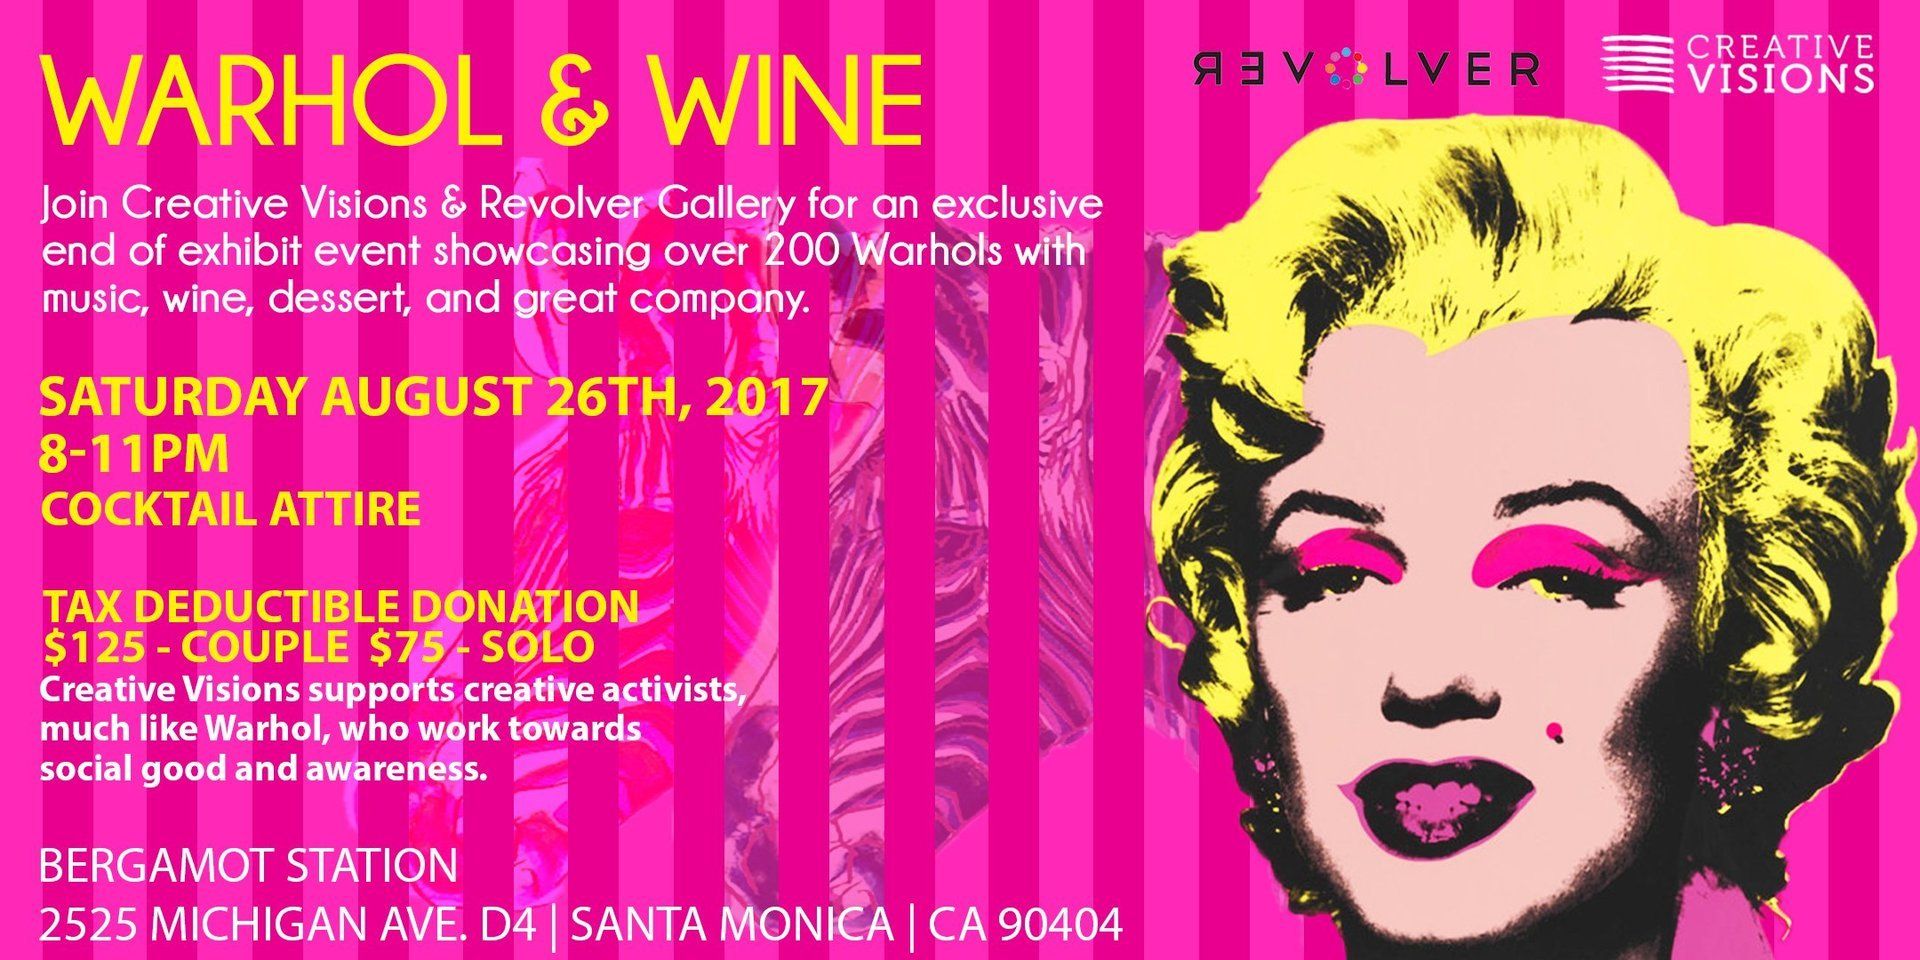 Creative Visions partners with Revolver Gallery to put on 'Warhol and Wine'